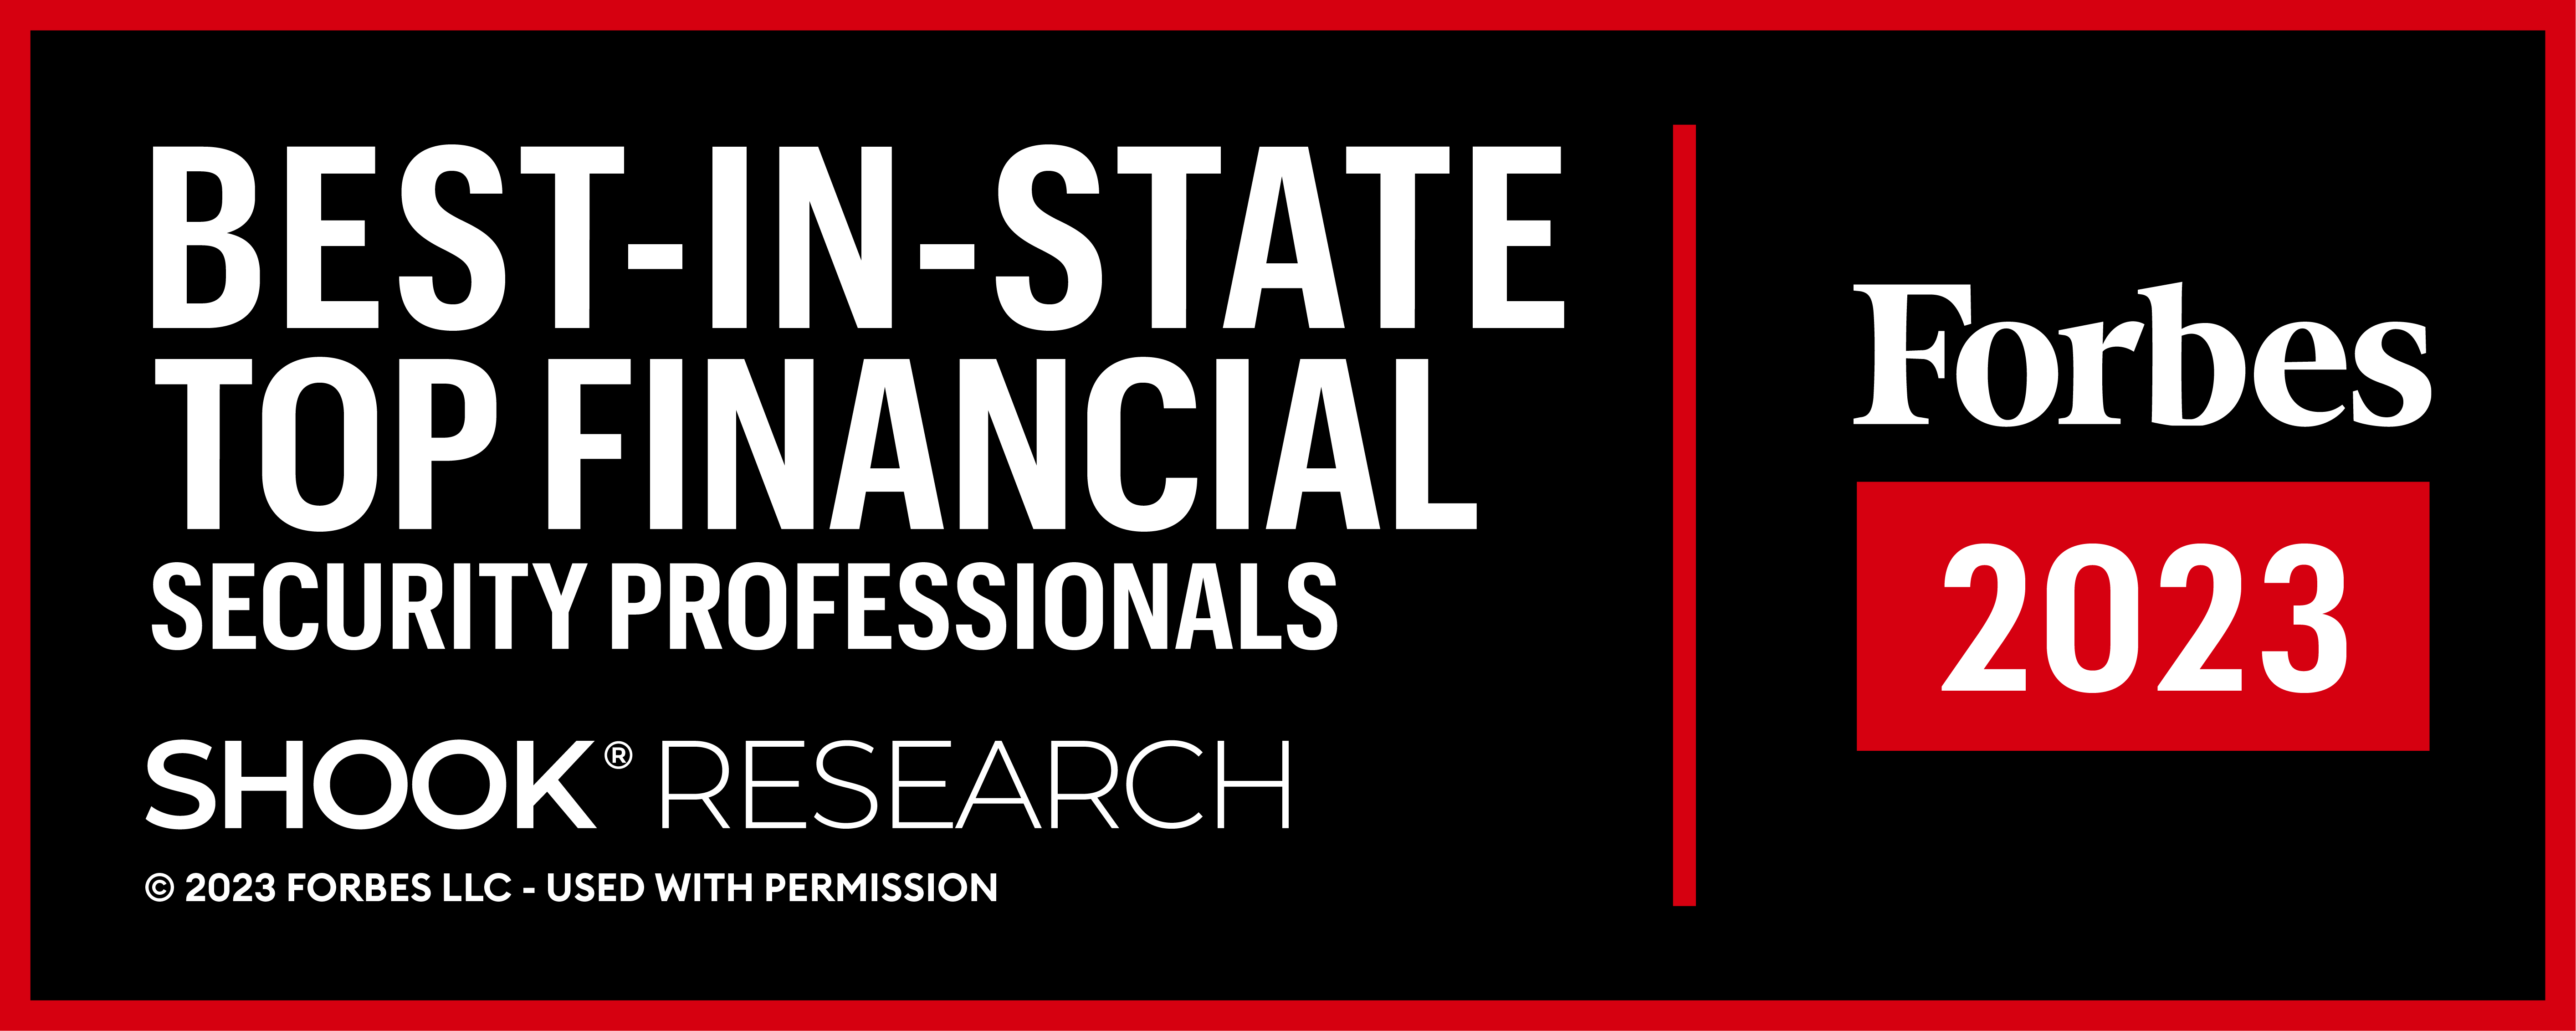 Forbes Best-In-State Top Financial Security Professionals Award 2023